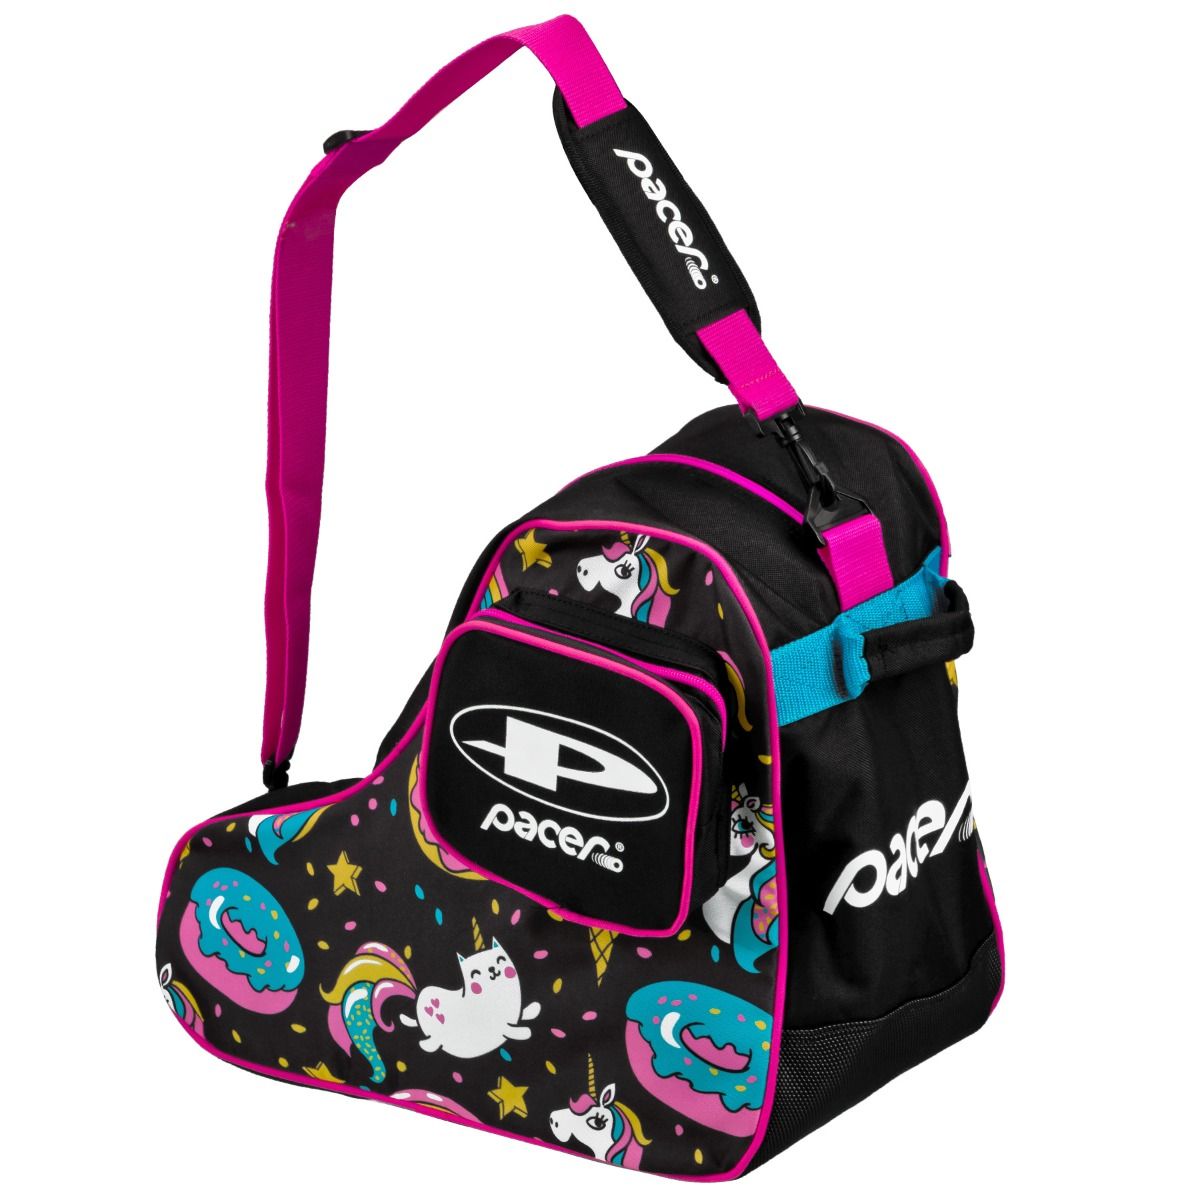 Pacer Skate Bag - Donuts Bags and Backpacks